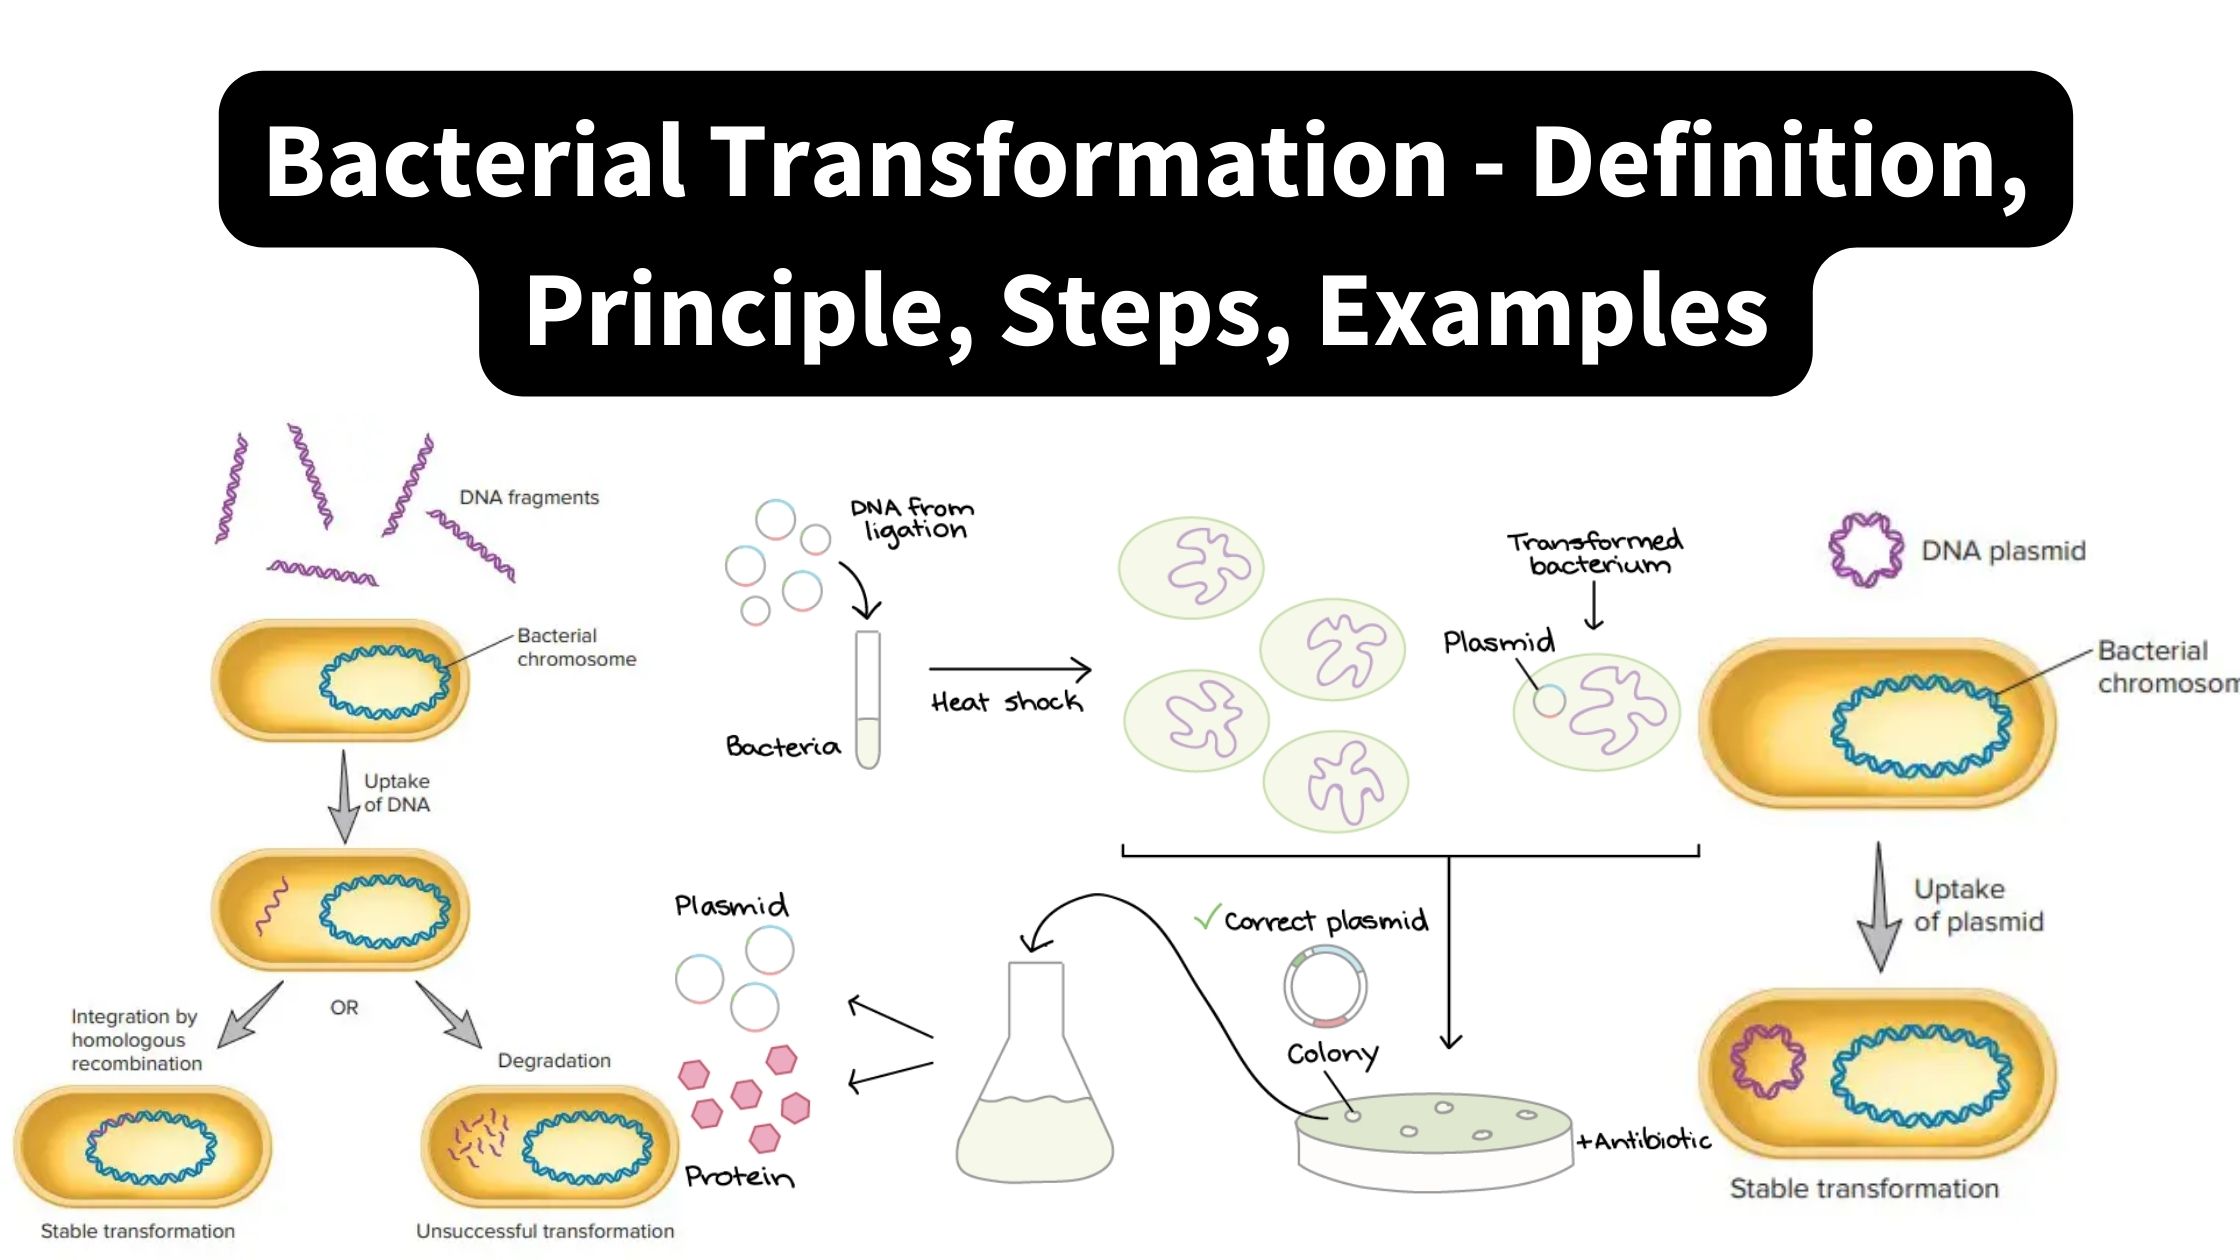 Bacterial Transformation - Definition, Principle, Steps, Examples